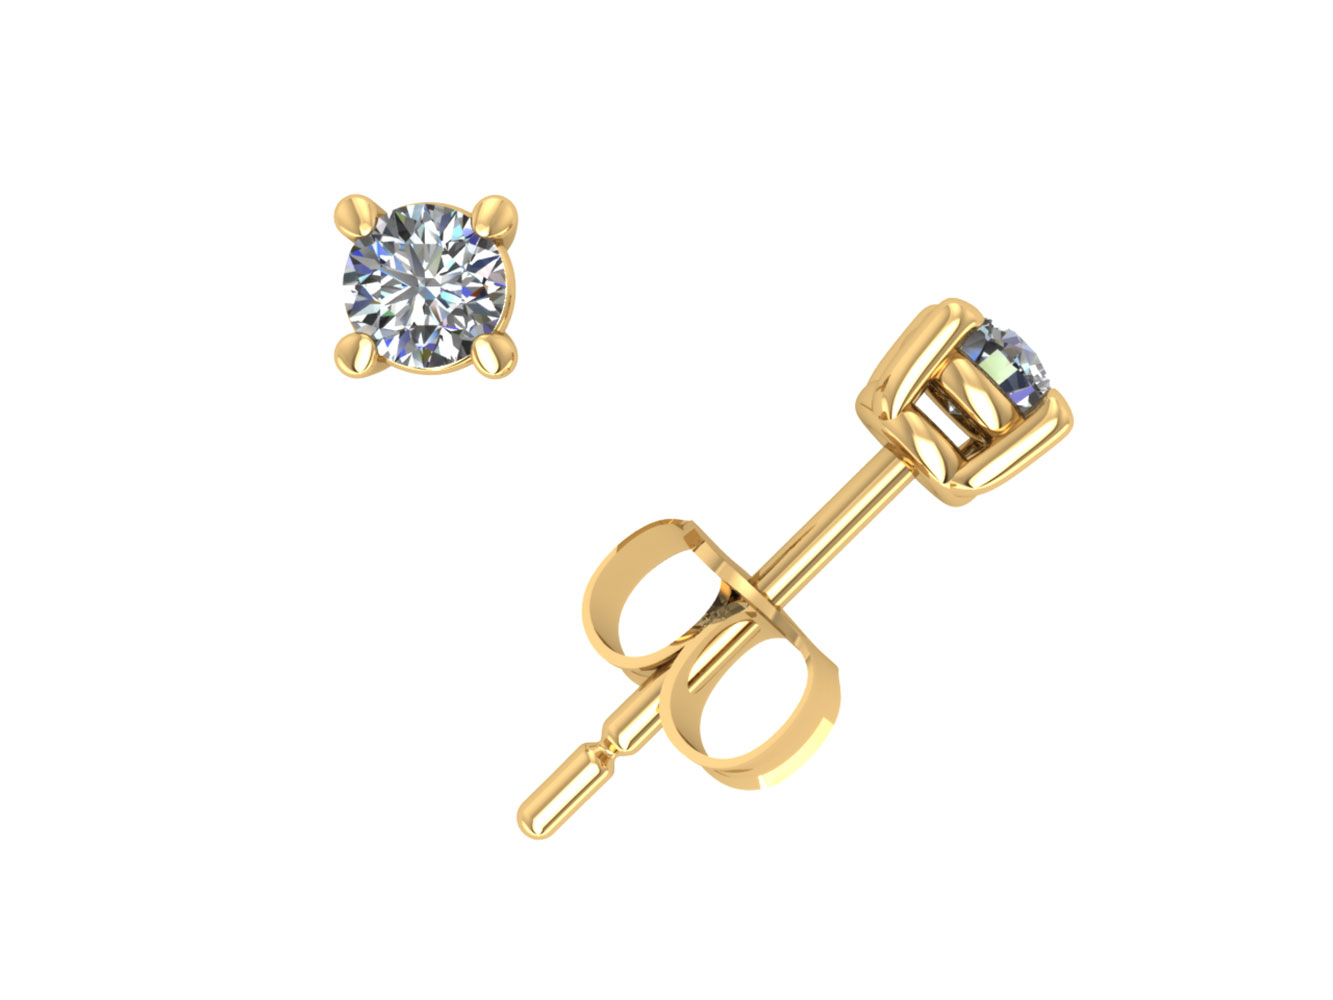 Jewel We Sell 1/4Carat Round Diamond Basket Solitaire Stud Earrings 18k White or Yellow Gold Prong G SI1